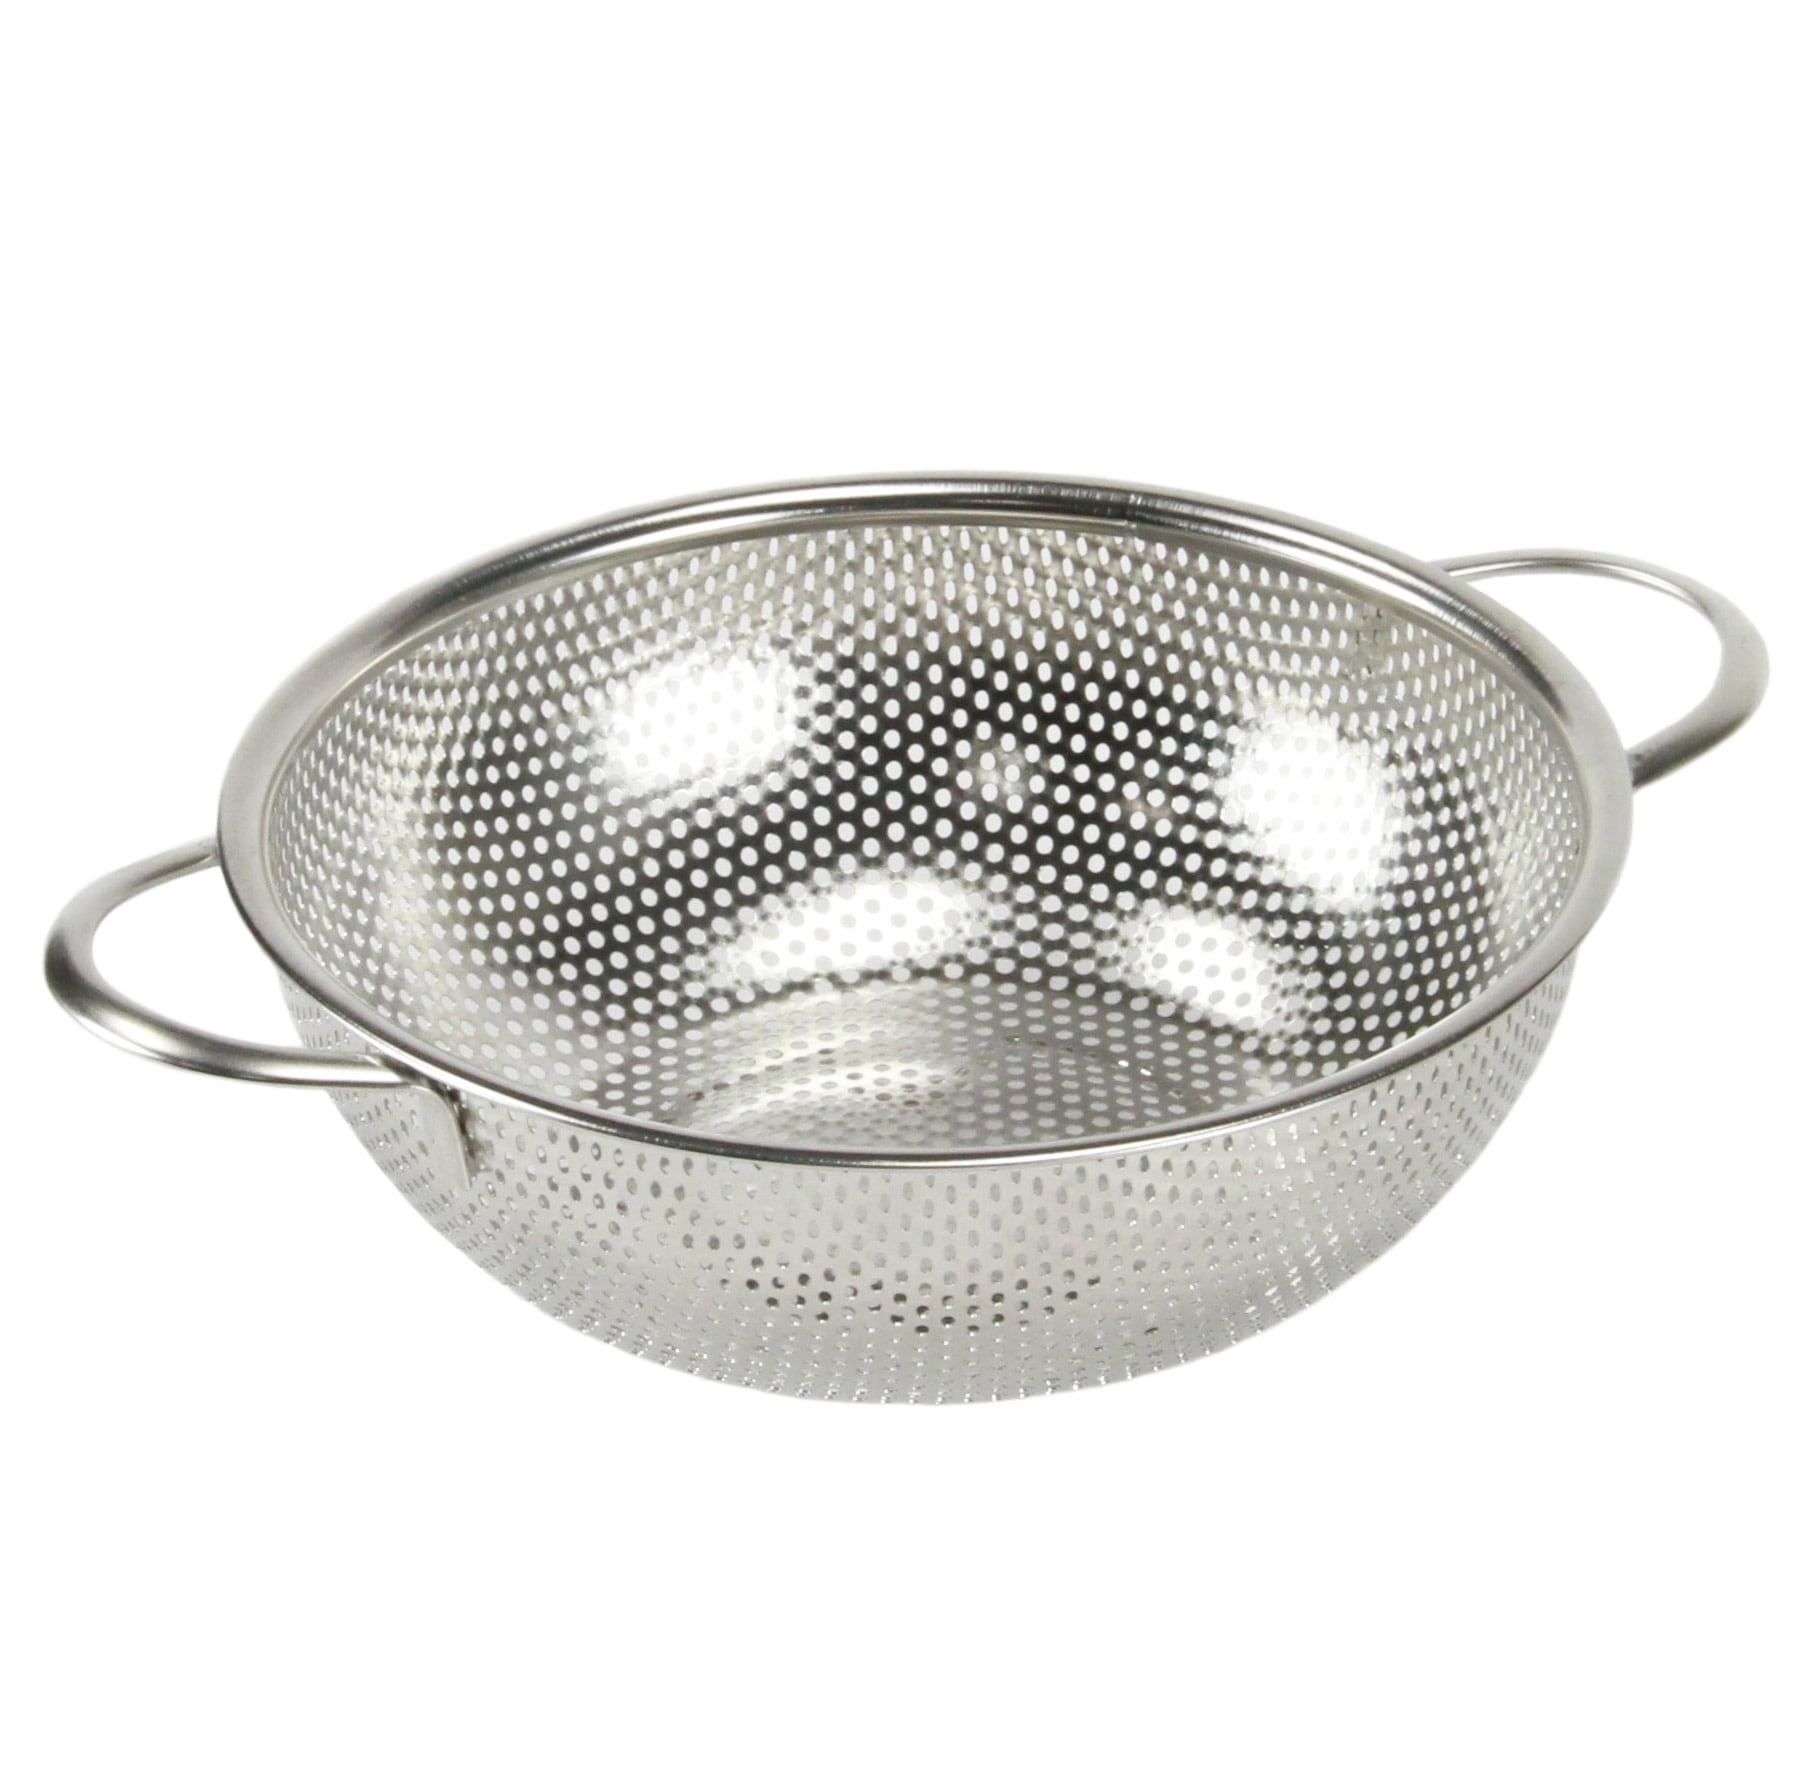 Picture of DDI 2288097 1.5 Quart Stainless Steel Colander Case of 36